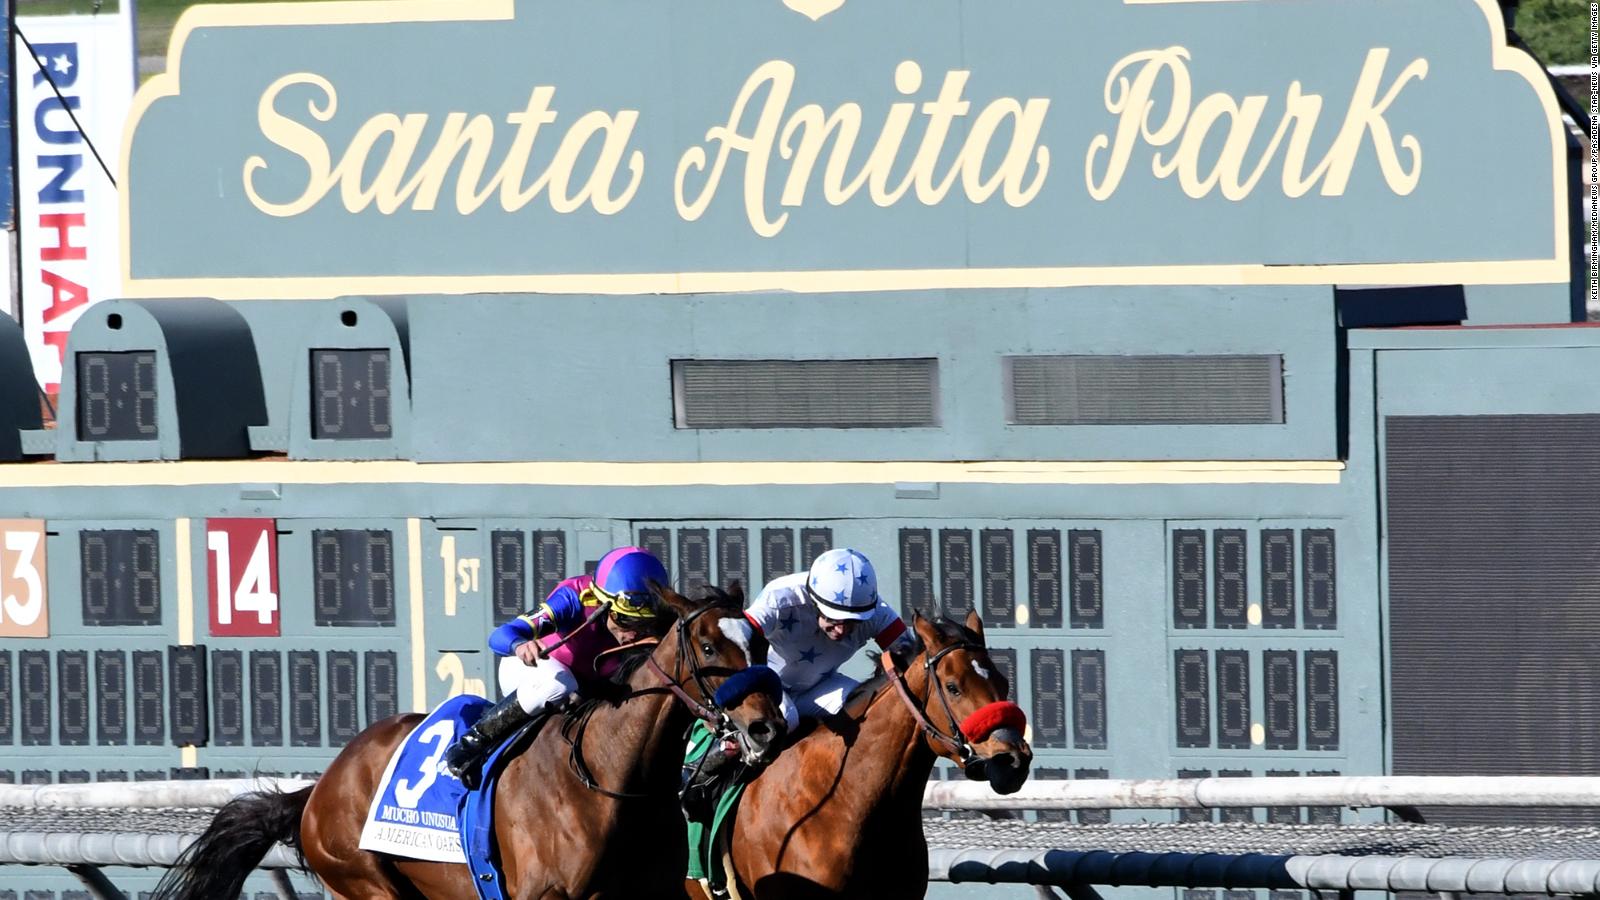 Another racehorse the fourth this year dies at Santa Anita racing